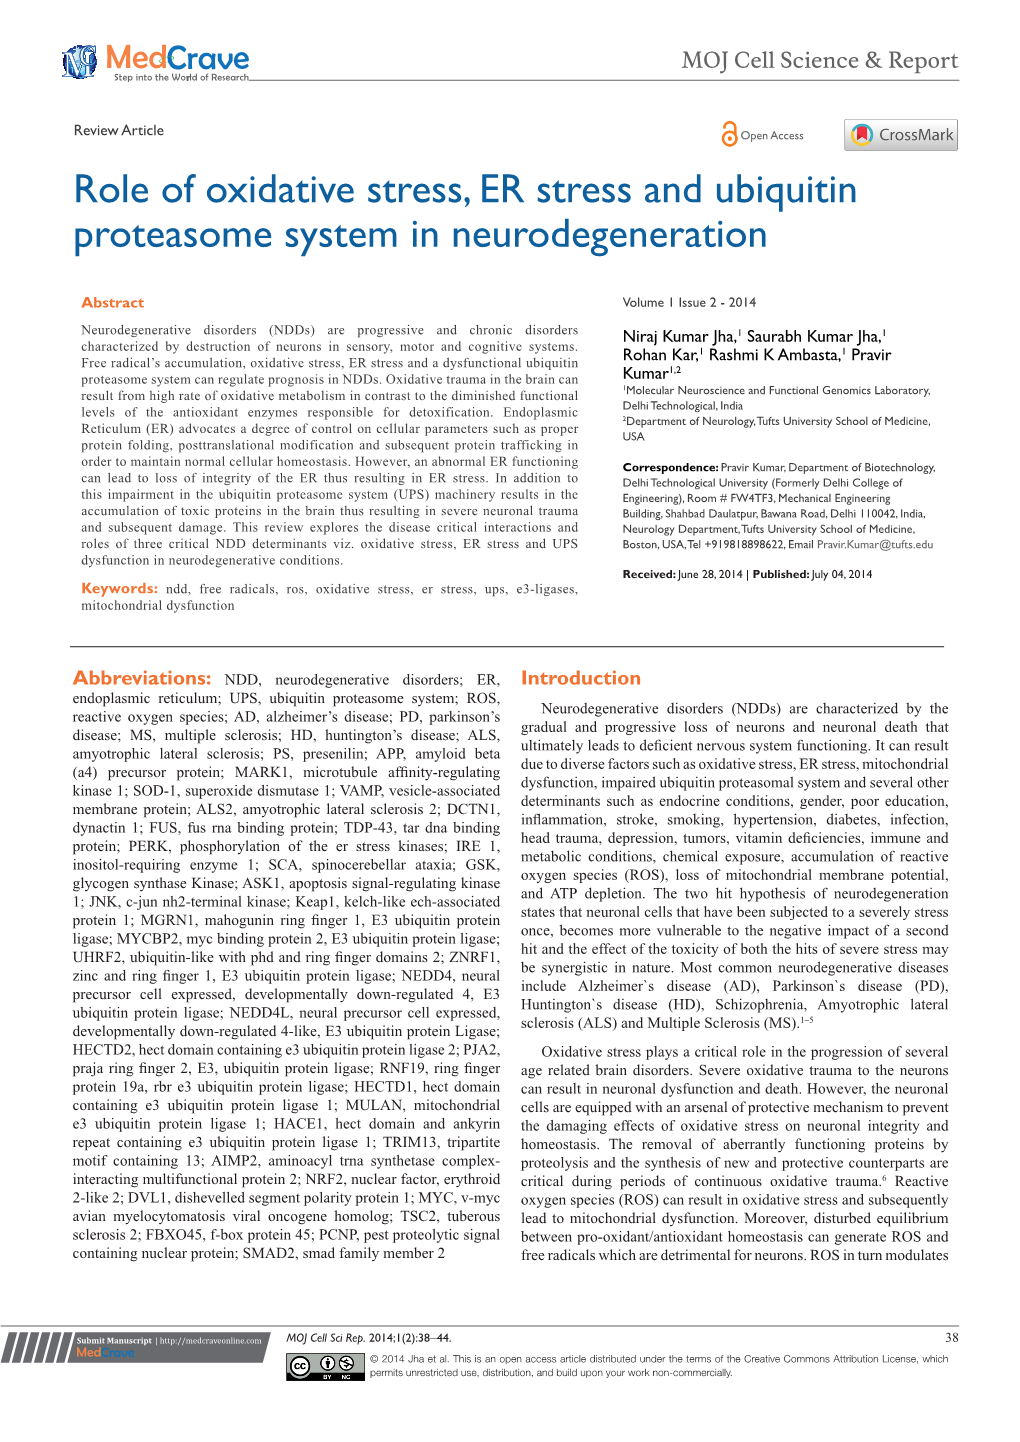 Role of Oxidative Stress, ER Stress and Ubiquitin Proteasome System in Neurodegeneration